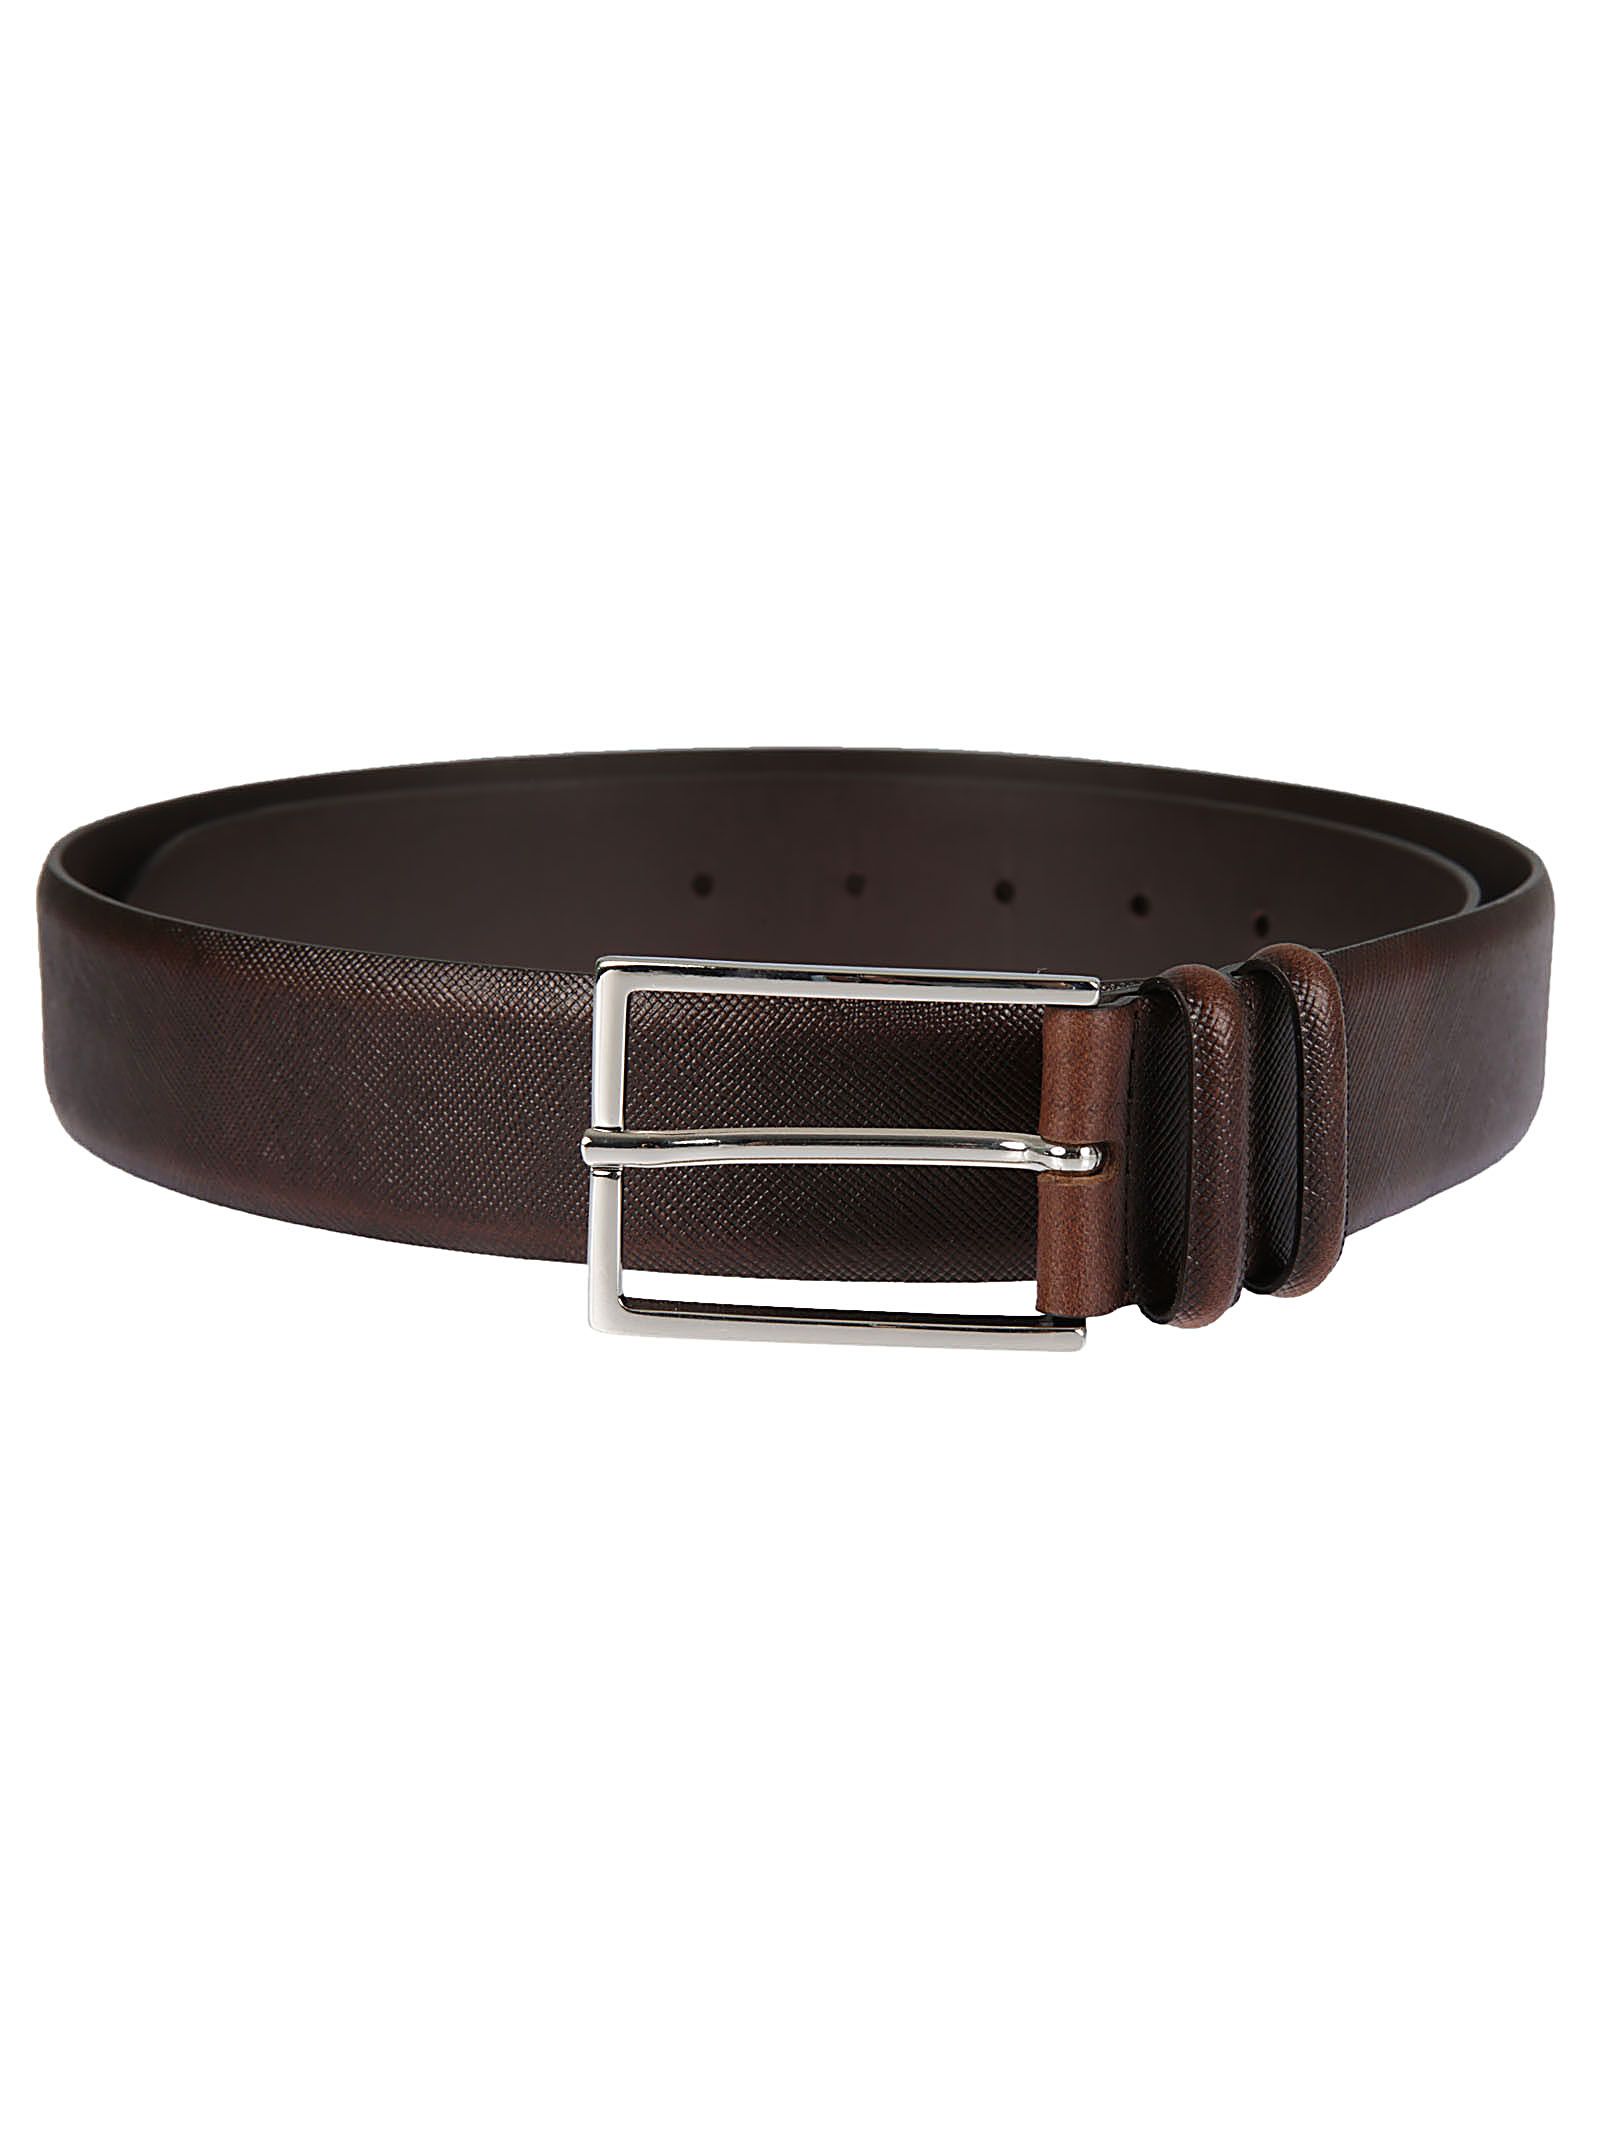 italist | Best price in the market for Orciani Orciani Patterned Belt ...